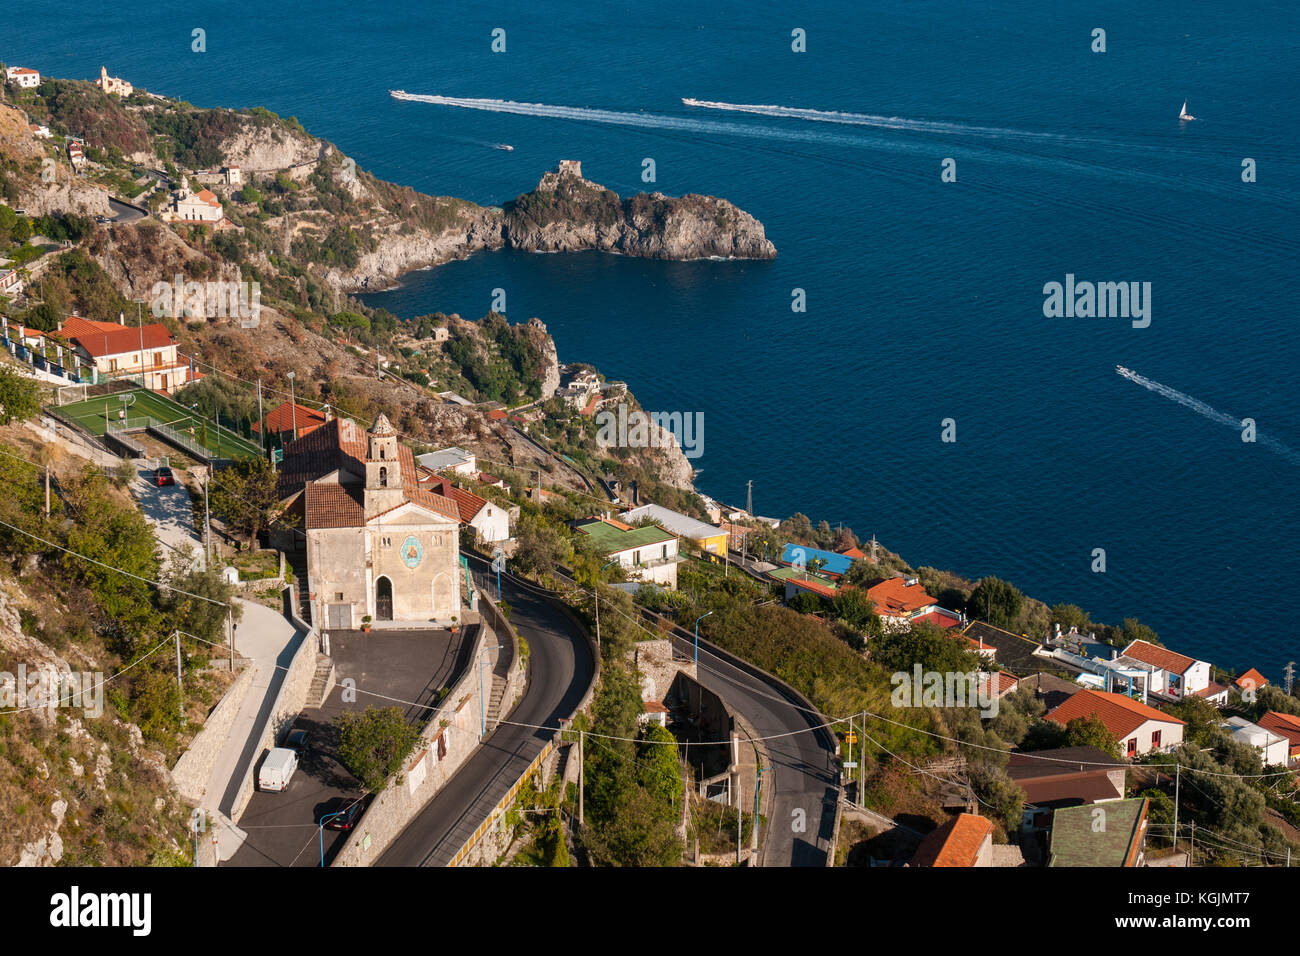 A view of the village of Furore, Italy. Furore, located on the Amalfi ...